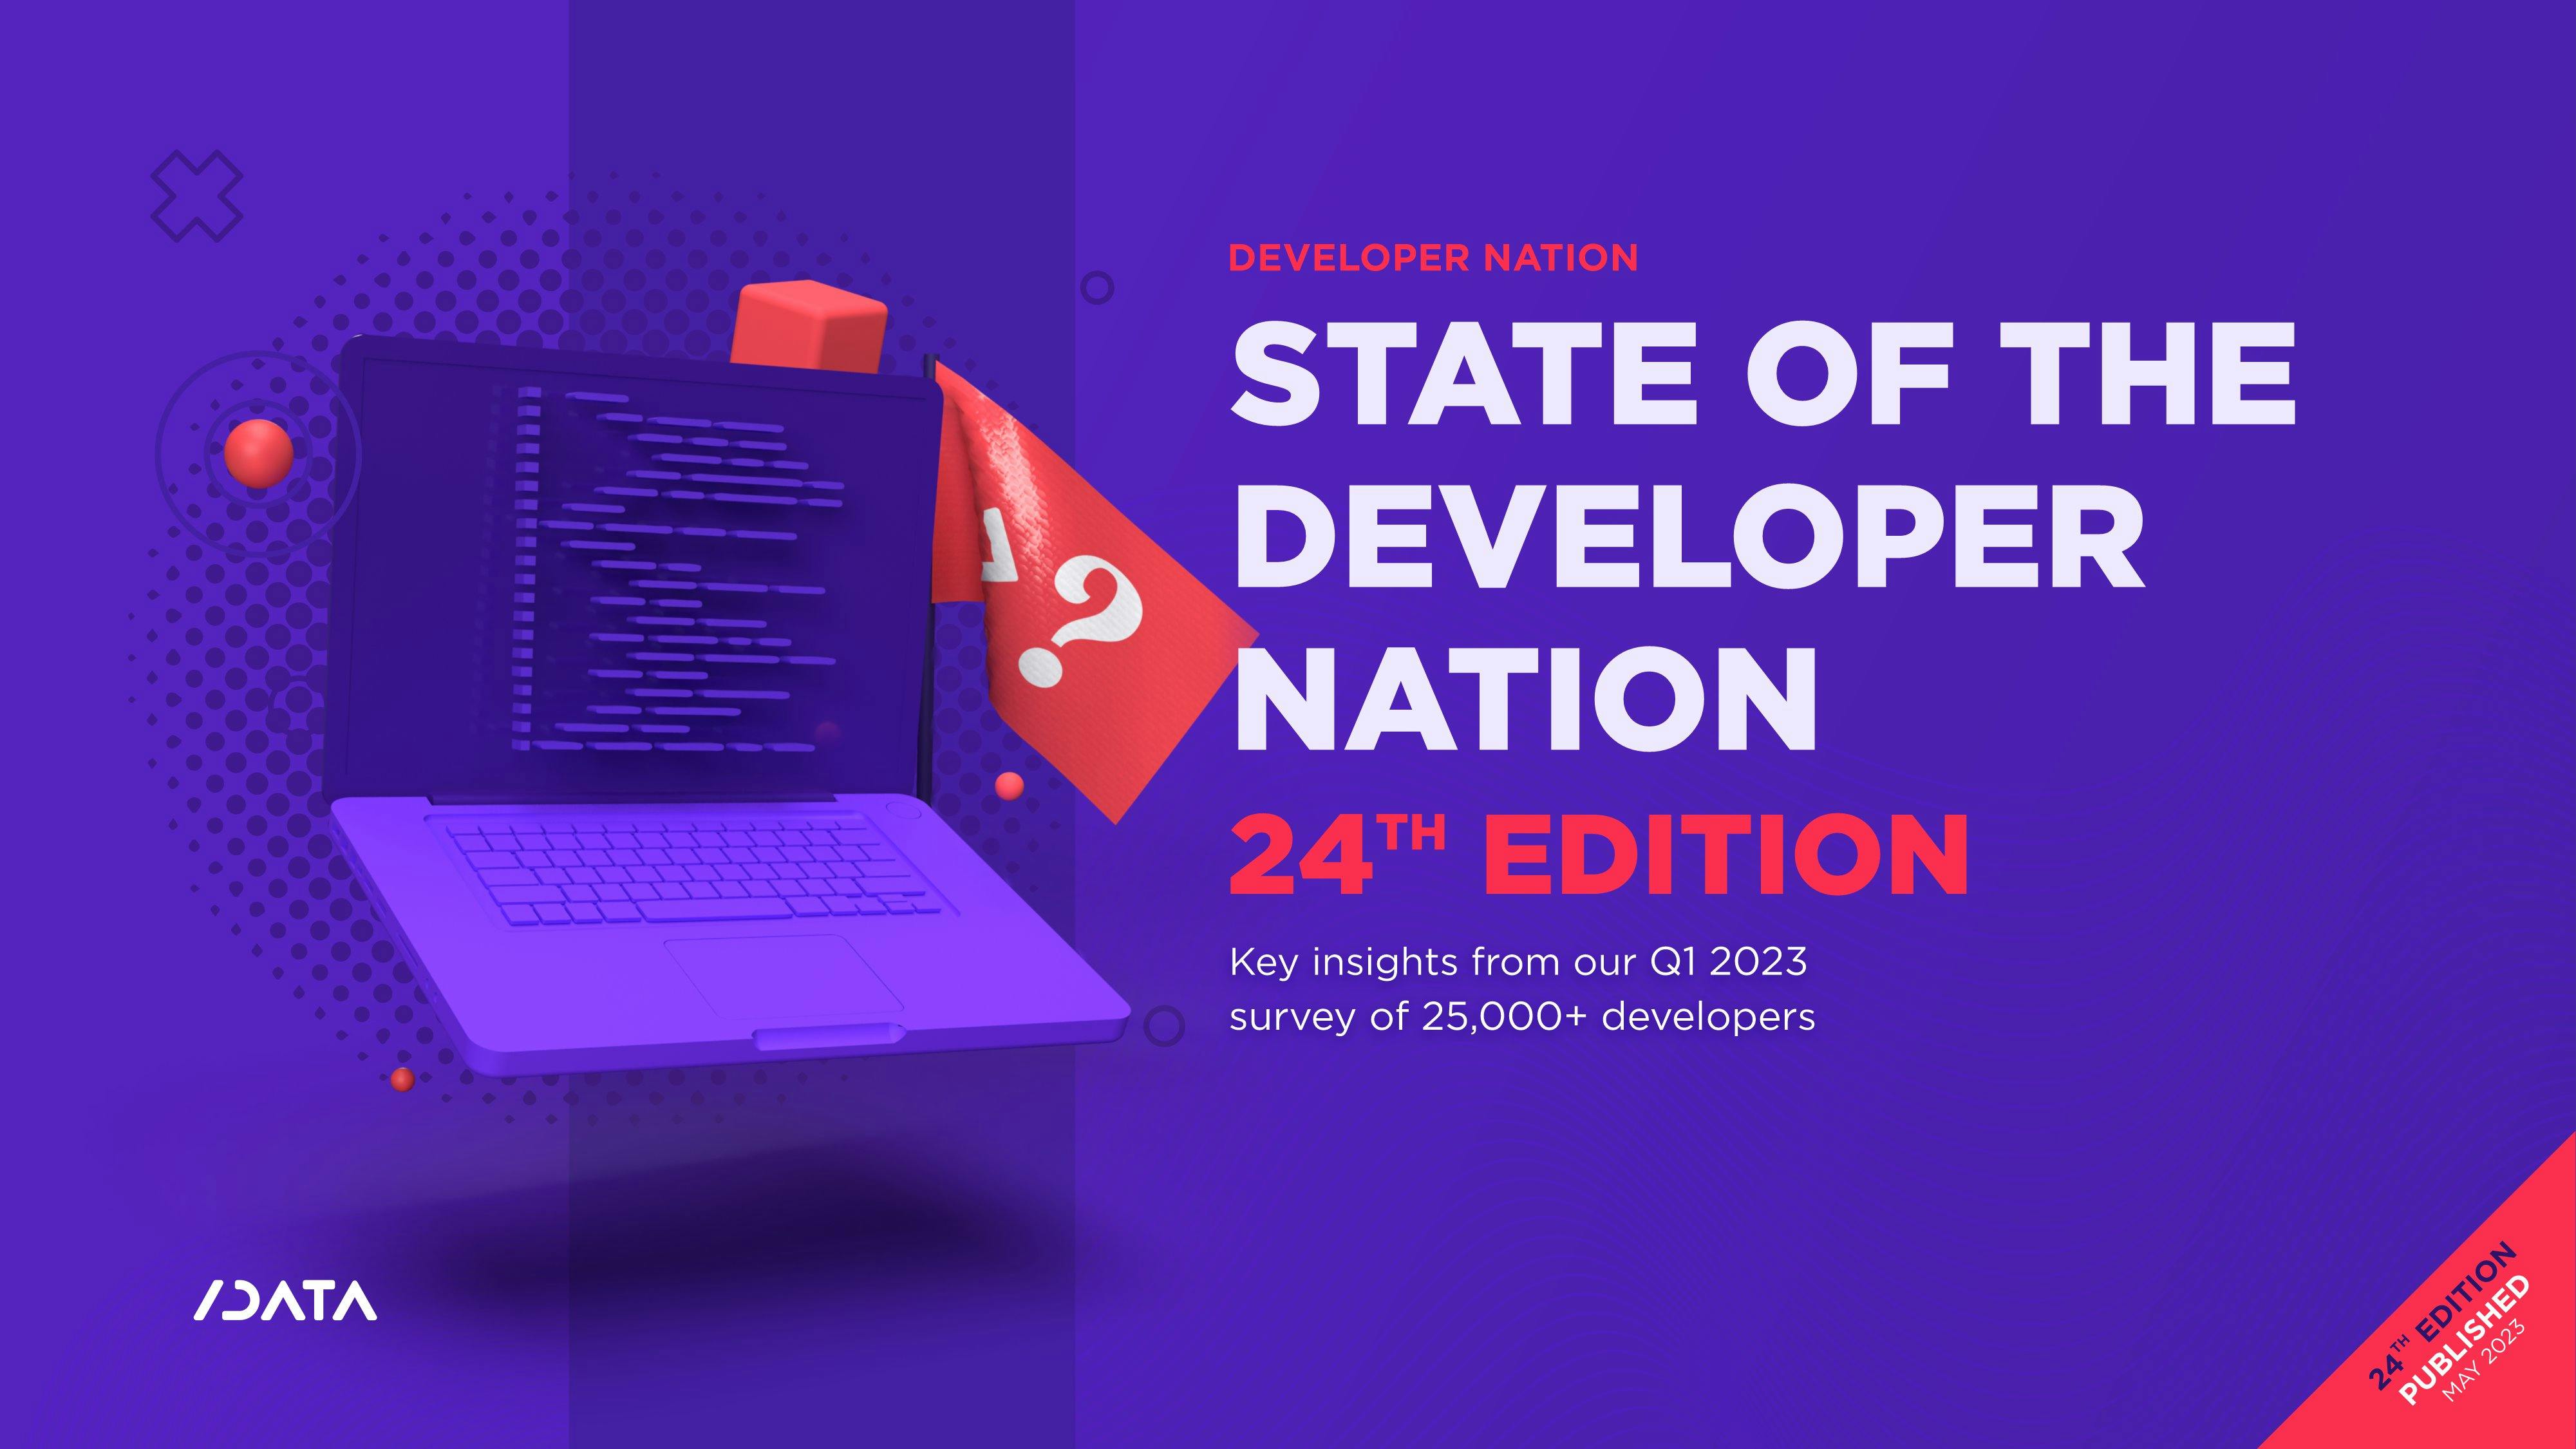 State of the Developer Nation 24th Edition - Q1 2023